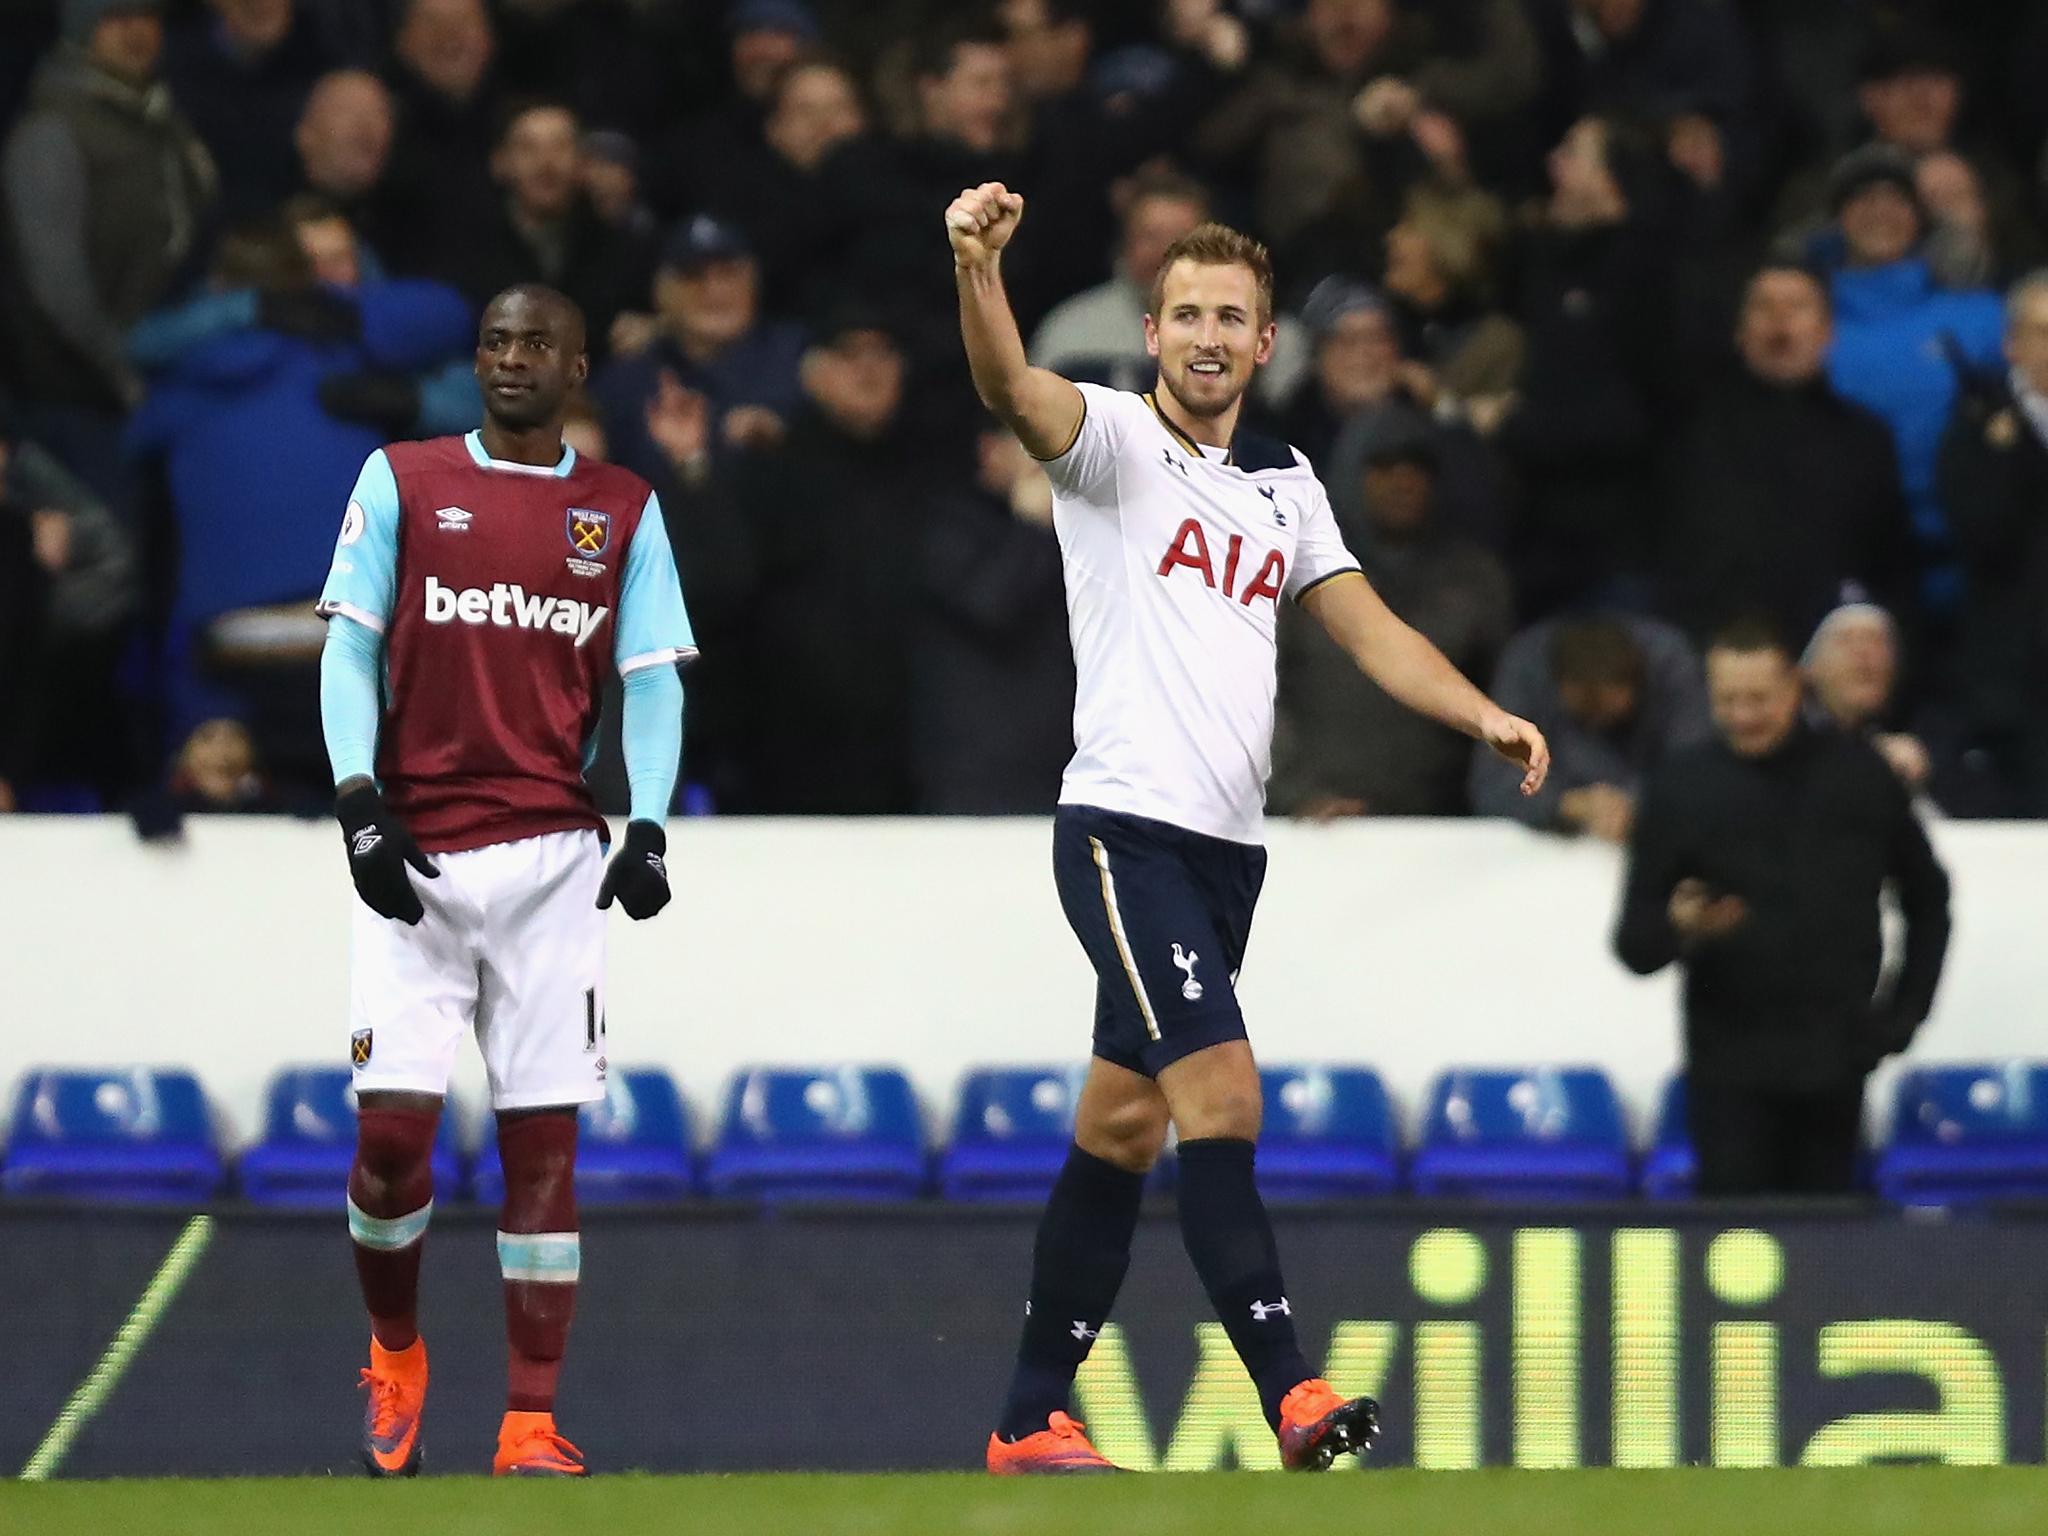 Kane is in hot form for Tottenham